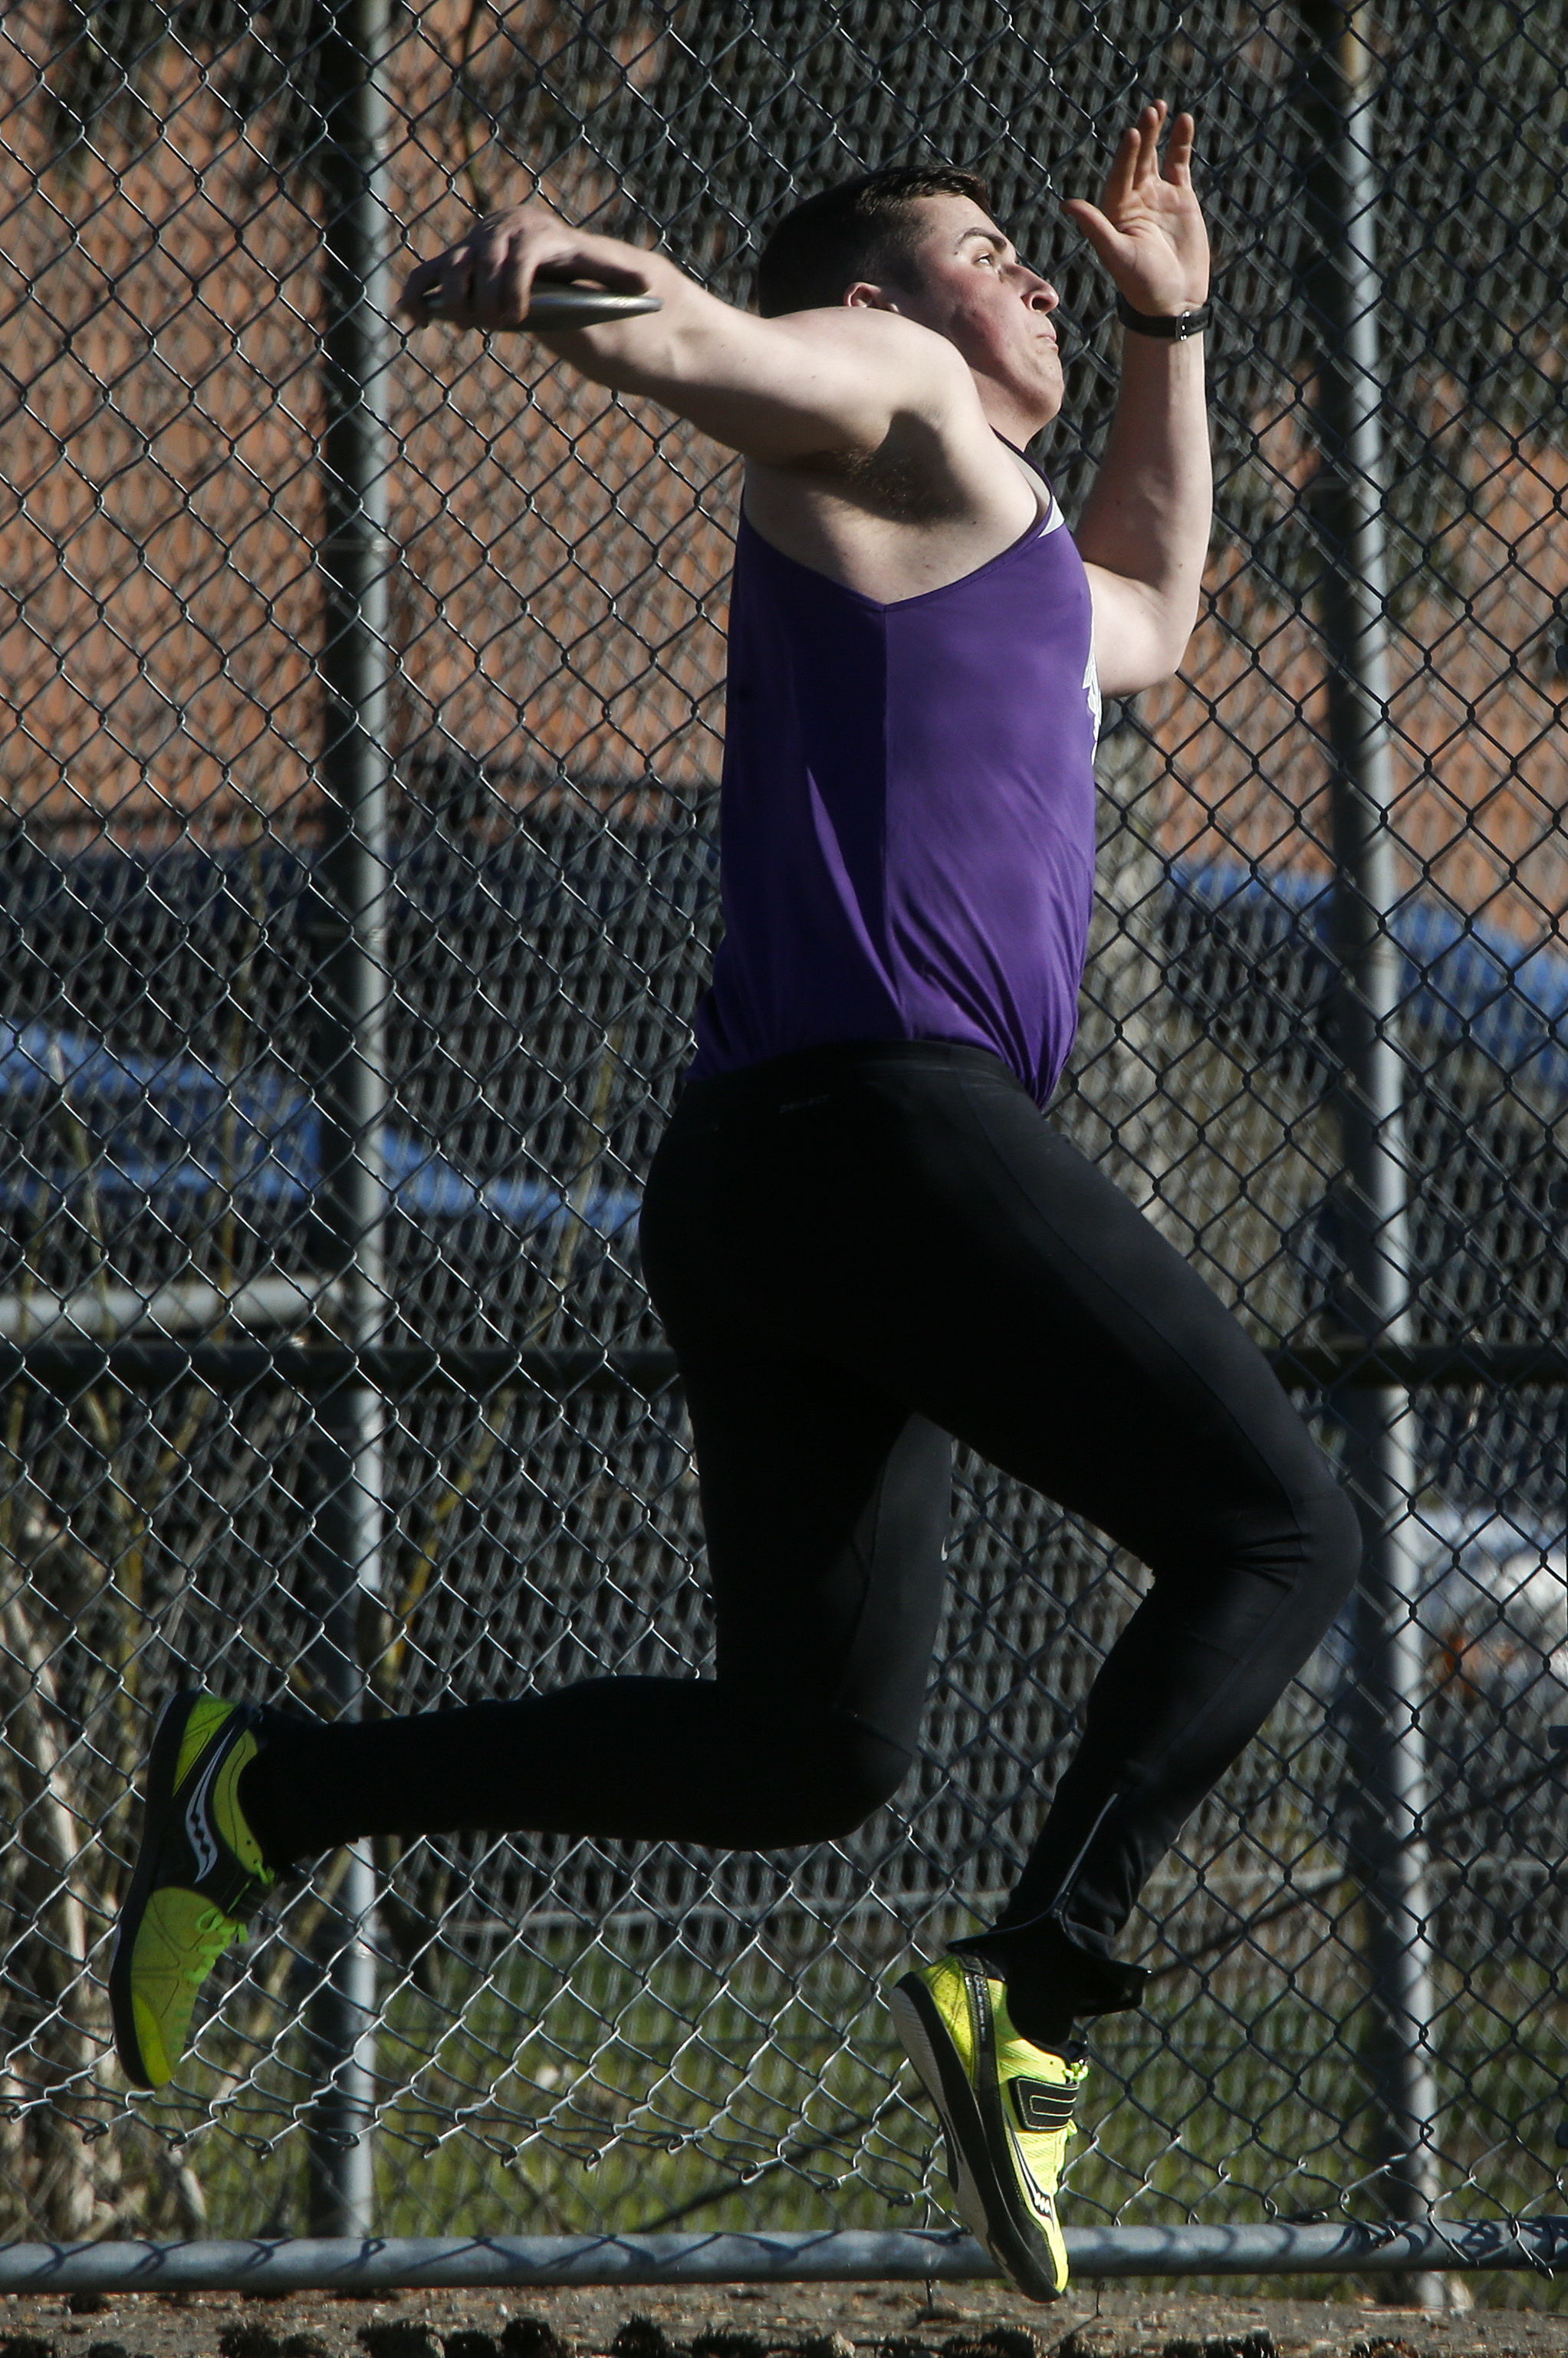 Kamiak track and field athlete Tim Beard winds up to throw during the discus event of a meet at Mariner High School on Thursday, March 31, 2016.